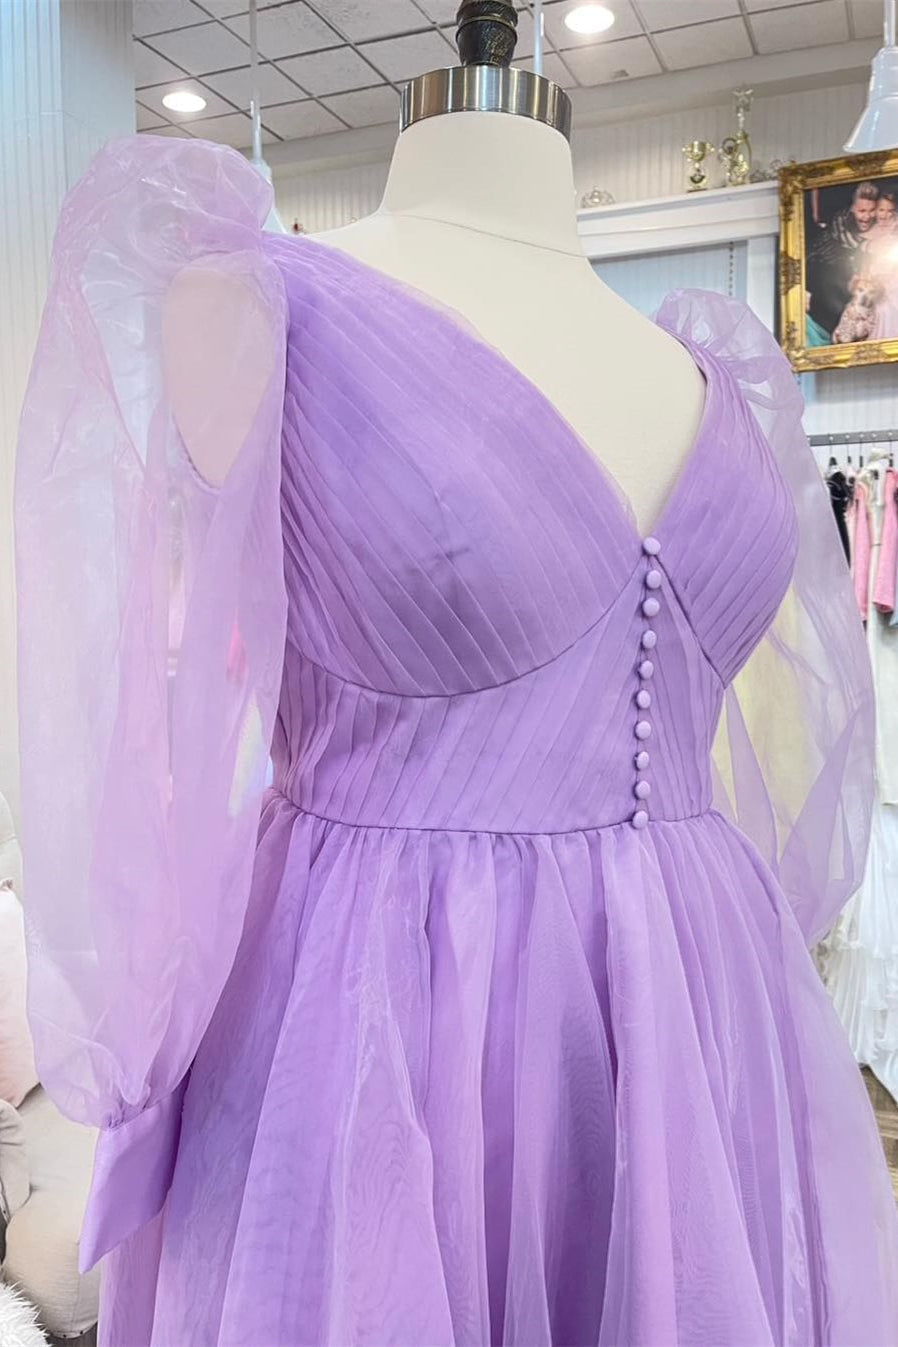 Party Dress Styling Ideas, Lavender Tulle V Neck Illusion Neck Pleated Long Prom Dress